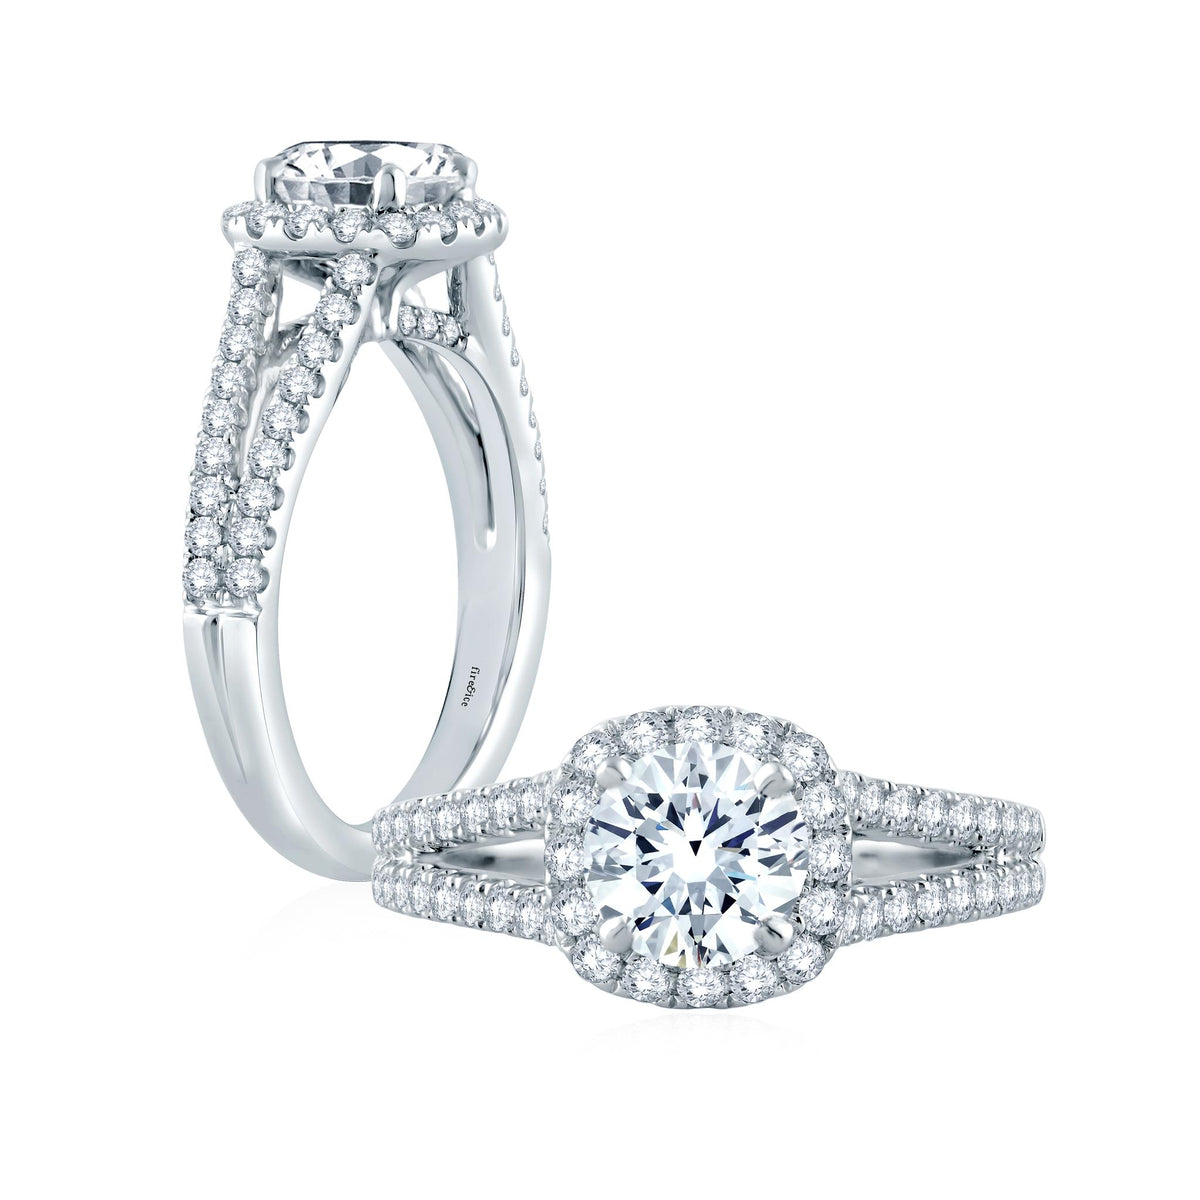 18Kt White Gold Halo Engagement Ring With 0.76ct Natural Center Diamond